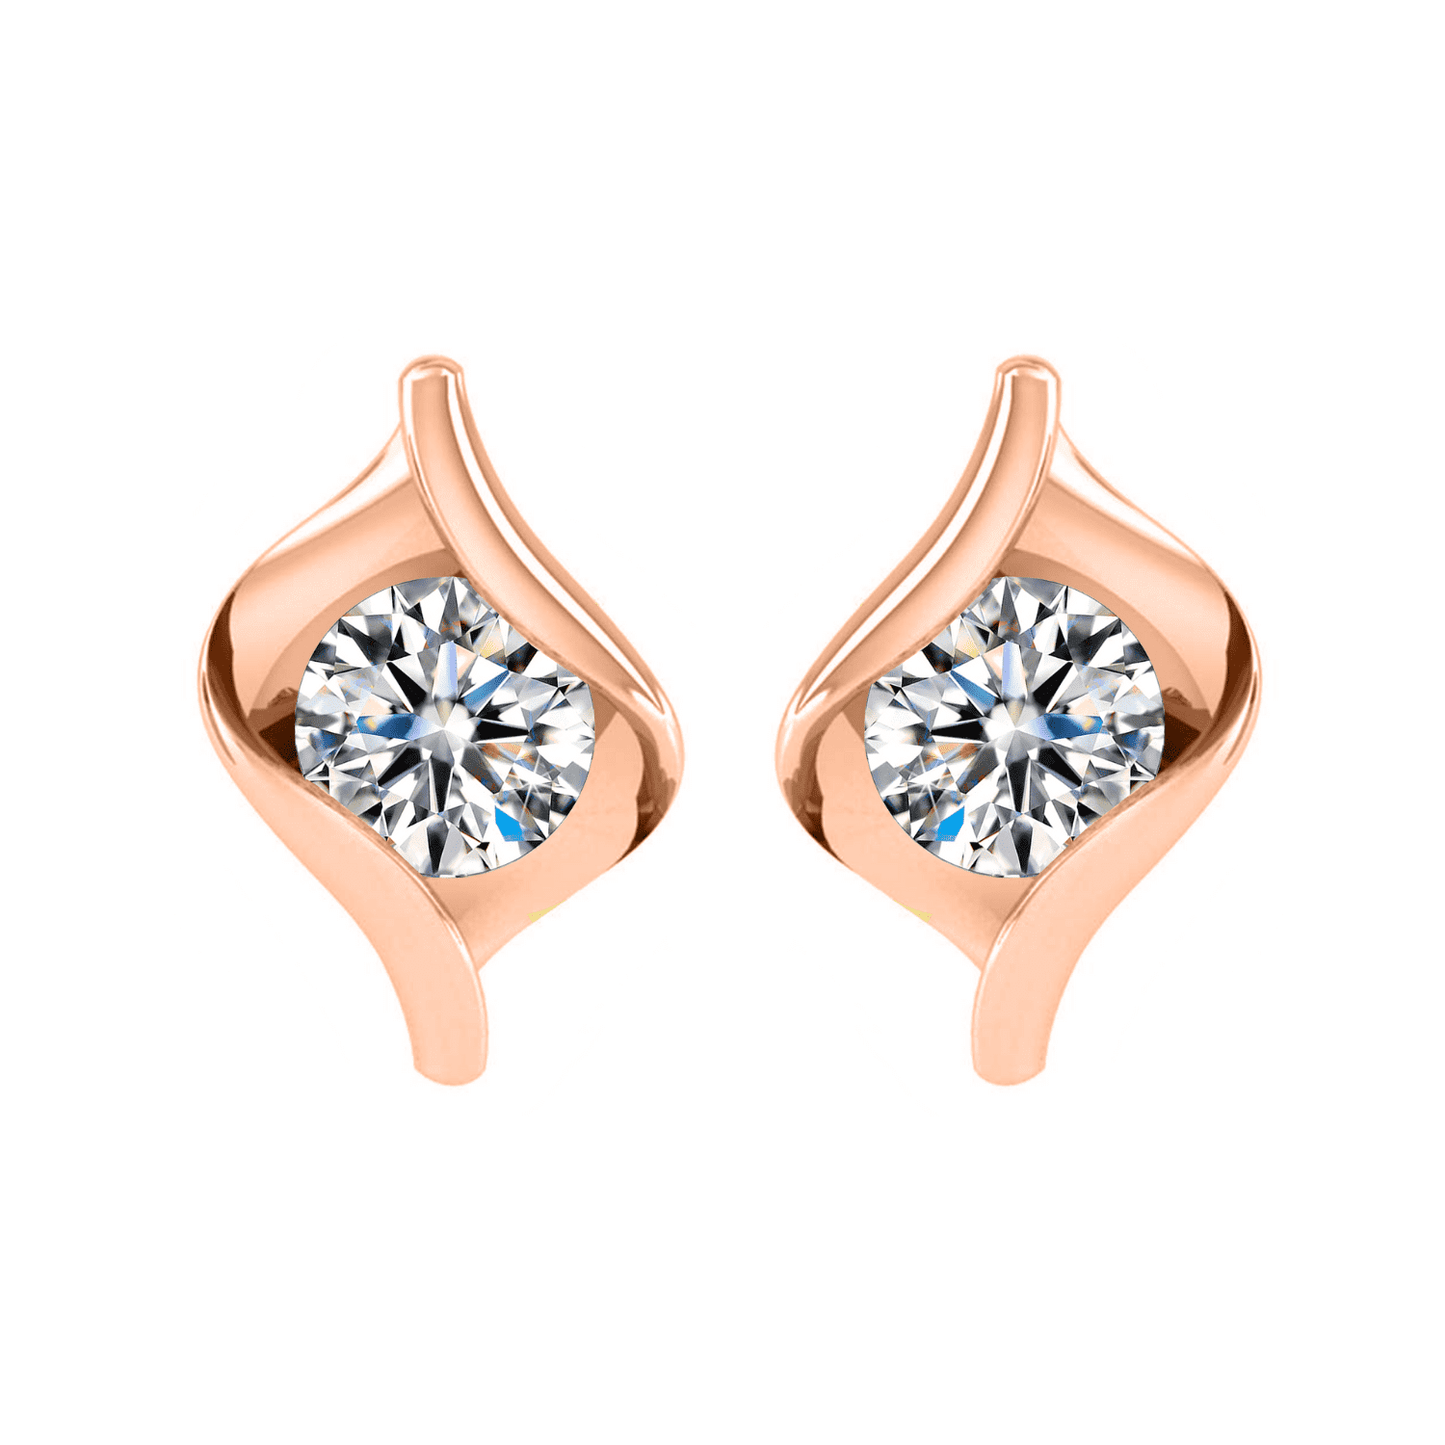 Rose Gold Designer Solitaire Earrings in 92.5 Silver embellished with Swarovski Zirconia - 92.5 Silver in 18K Rose Gold Finish